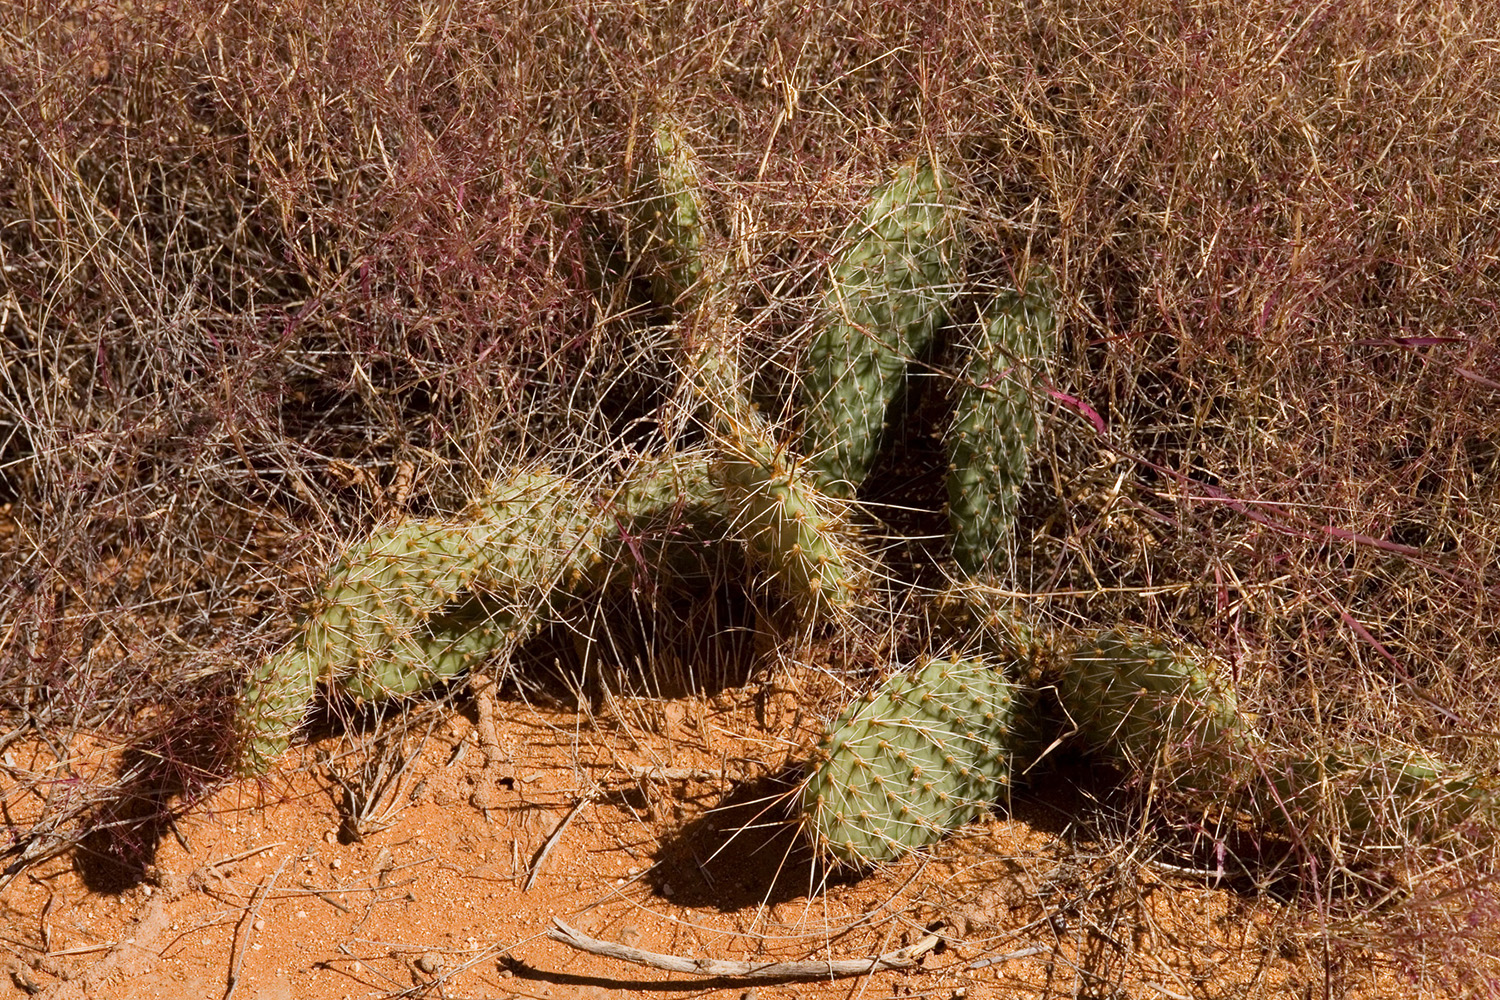 Growth habit of Opuntia polyacantha var. polyacantha close to the ground in a tangle of grasses